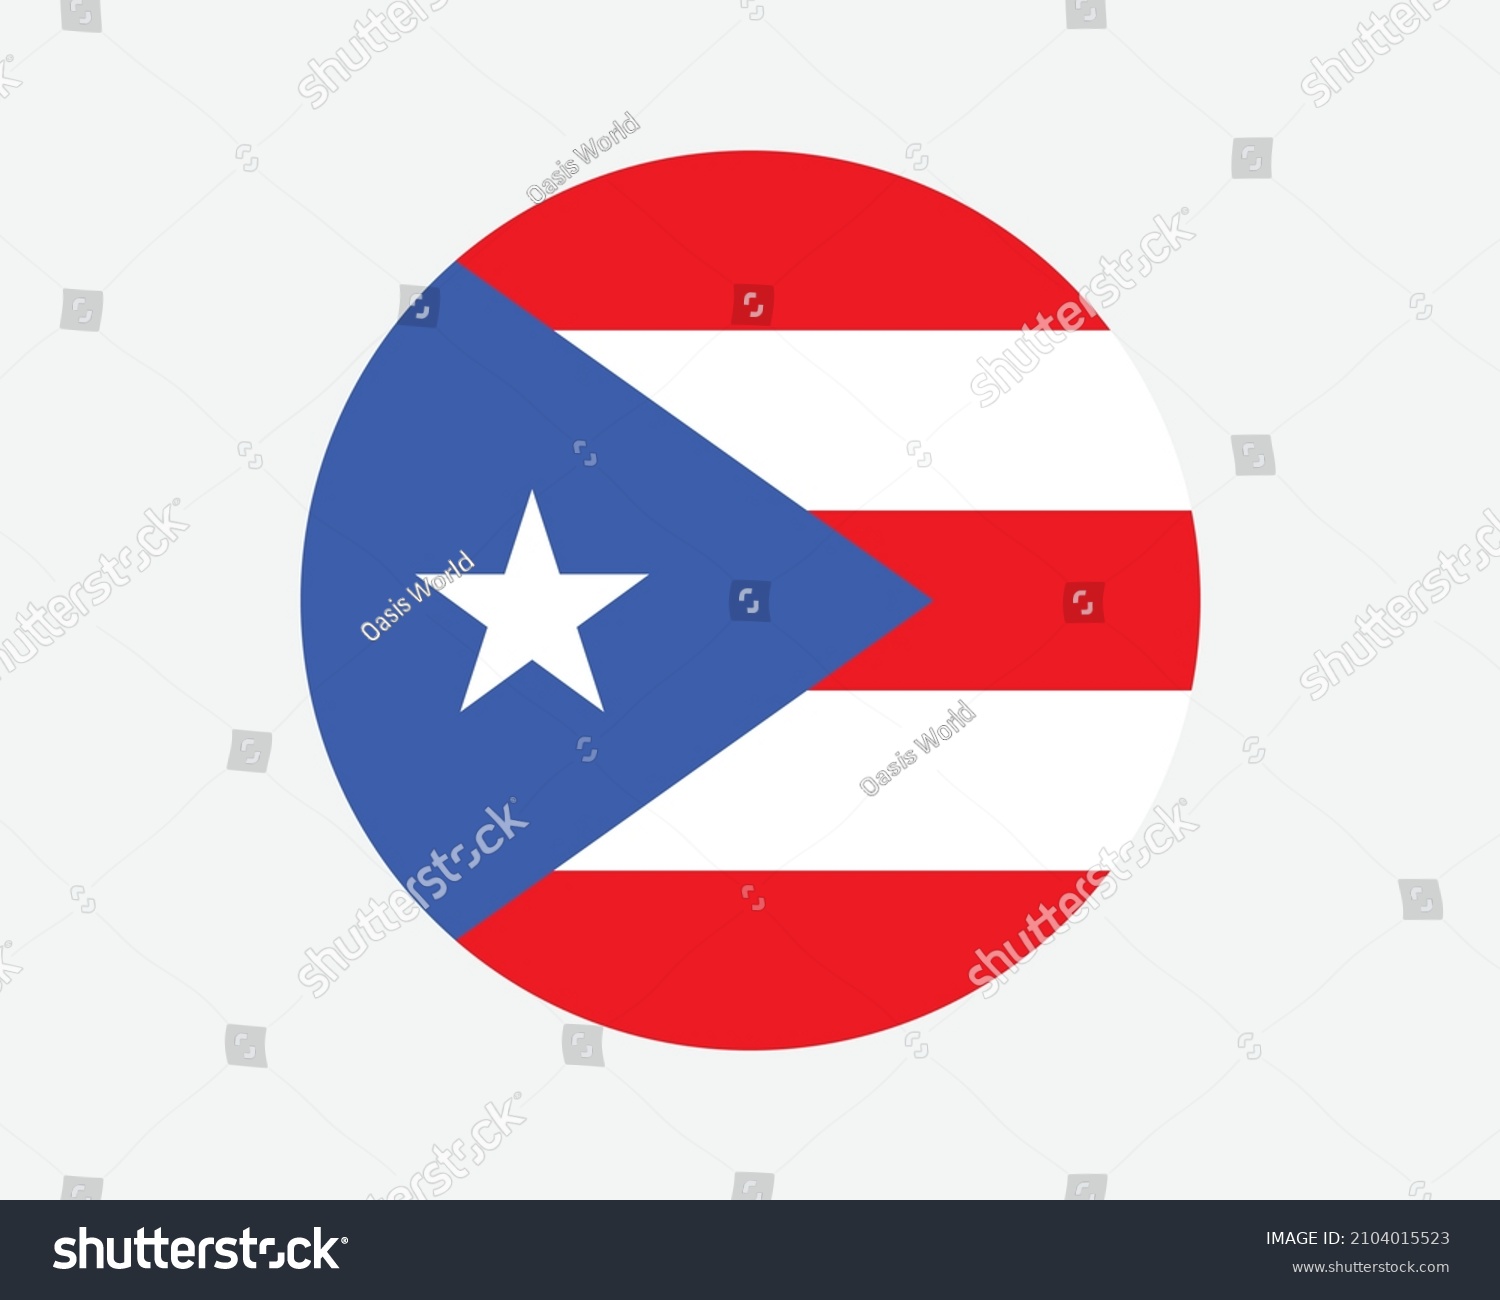 SVG of Puerto Rico Round Flag. PR, Puerto Rican Circle Flag. Unincorporated and Organized US USA Commonwealth Circular Shape Button Banner. EPS Vector Illustration. svg